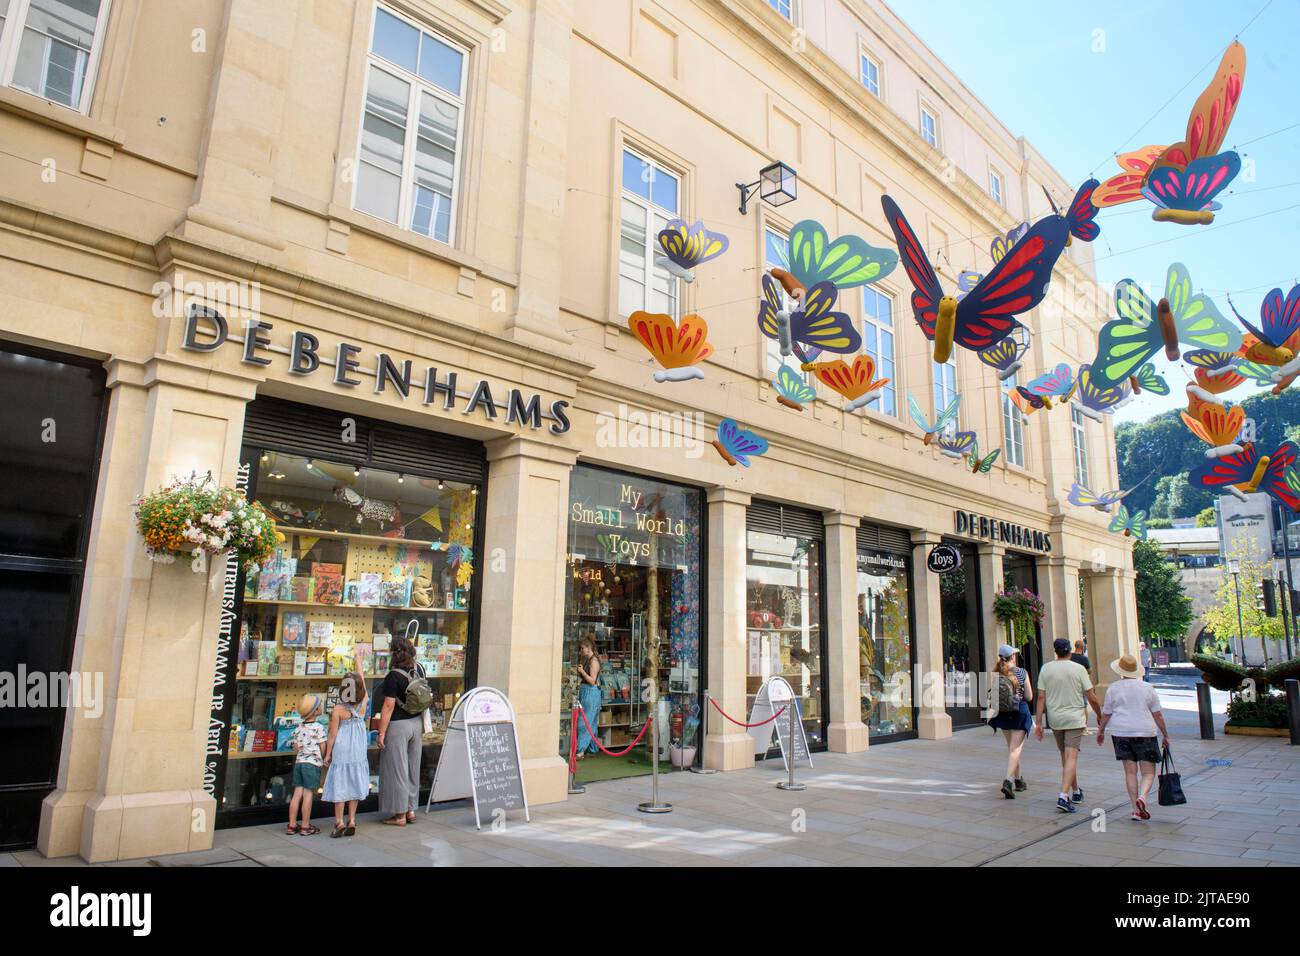 The now closed Debenhams department store surrounding the My Small World toy shop in St Lawrence Street, Bath Stock Photo